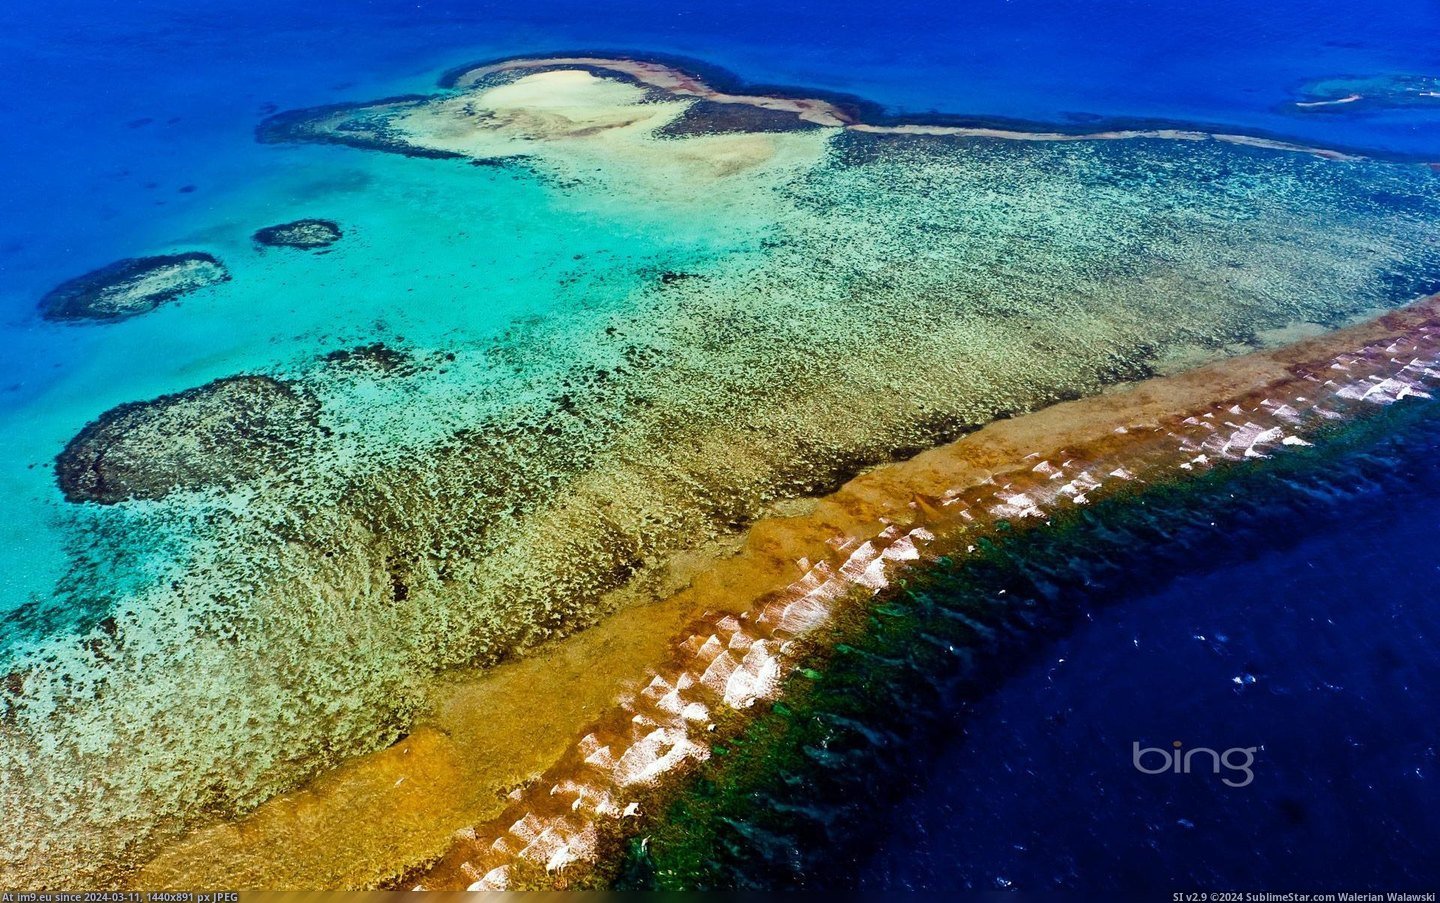 Aerial view, New Caledonia Barrier Reef, near Noumea, New Caledonia (in Bing Photos November 2012)